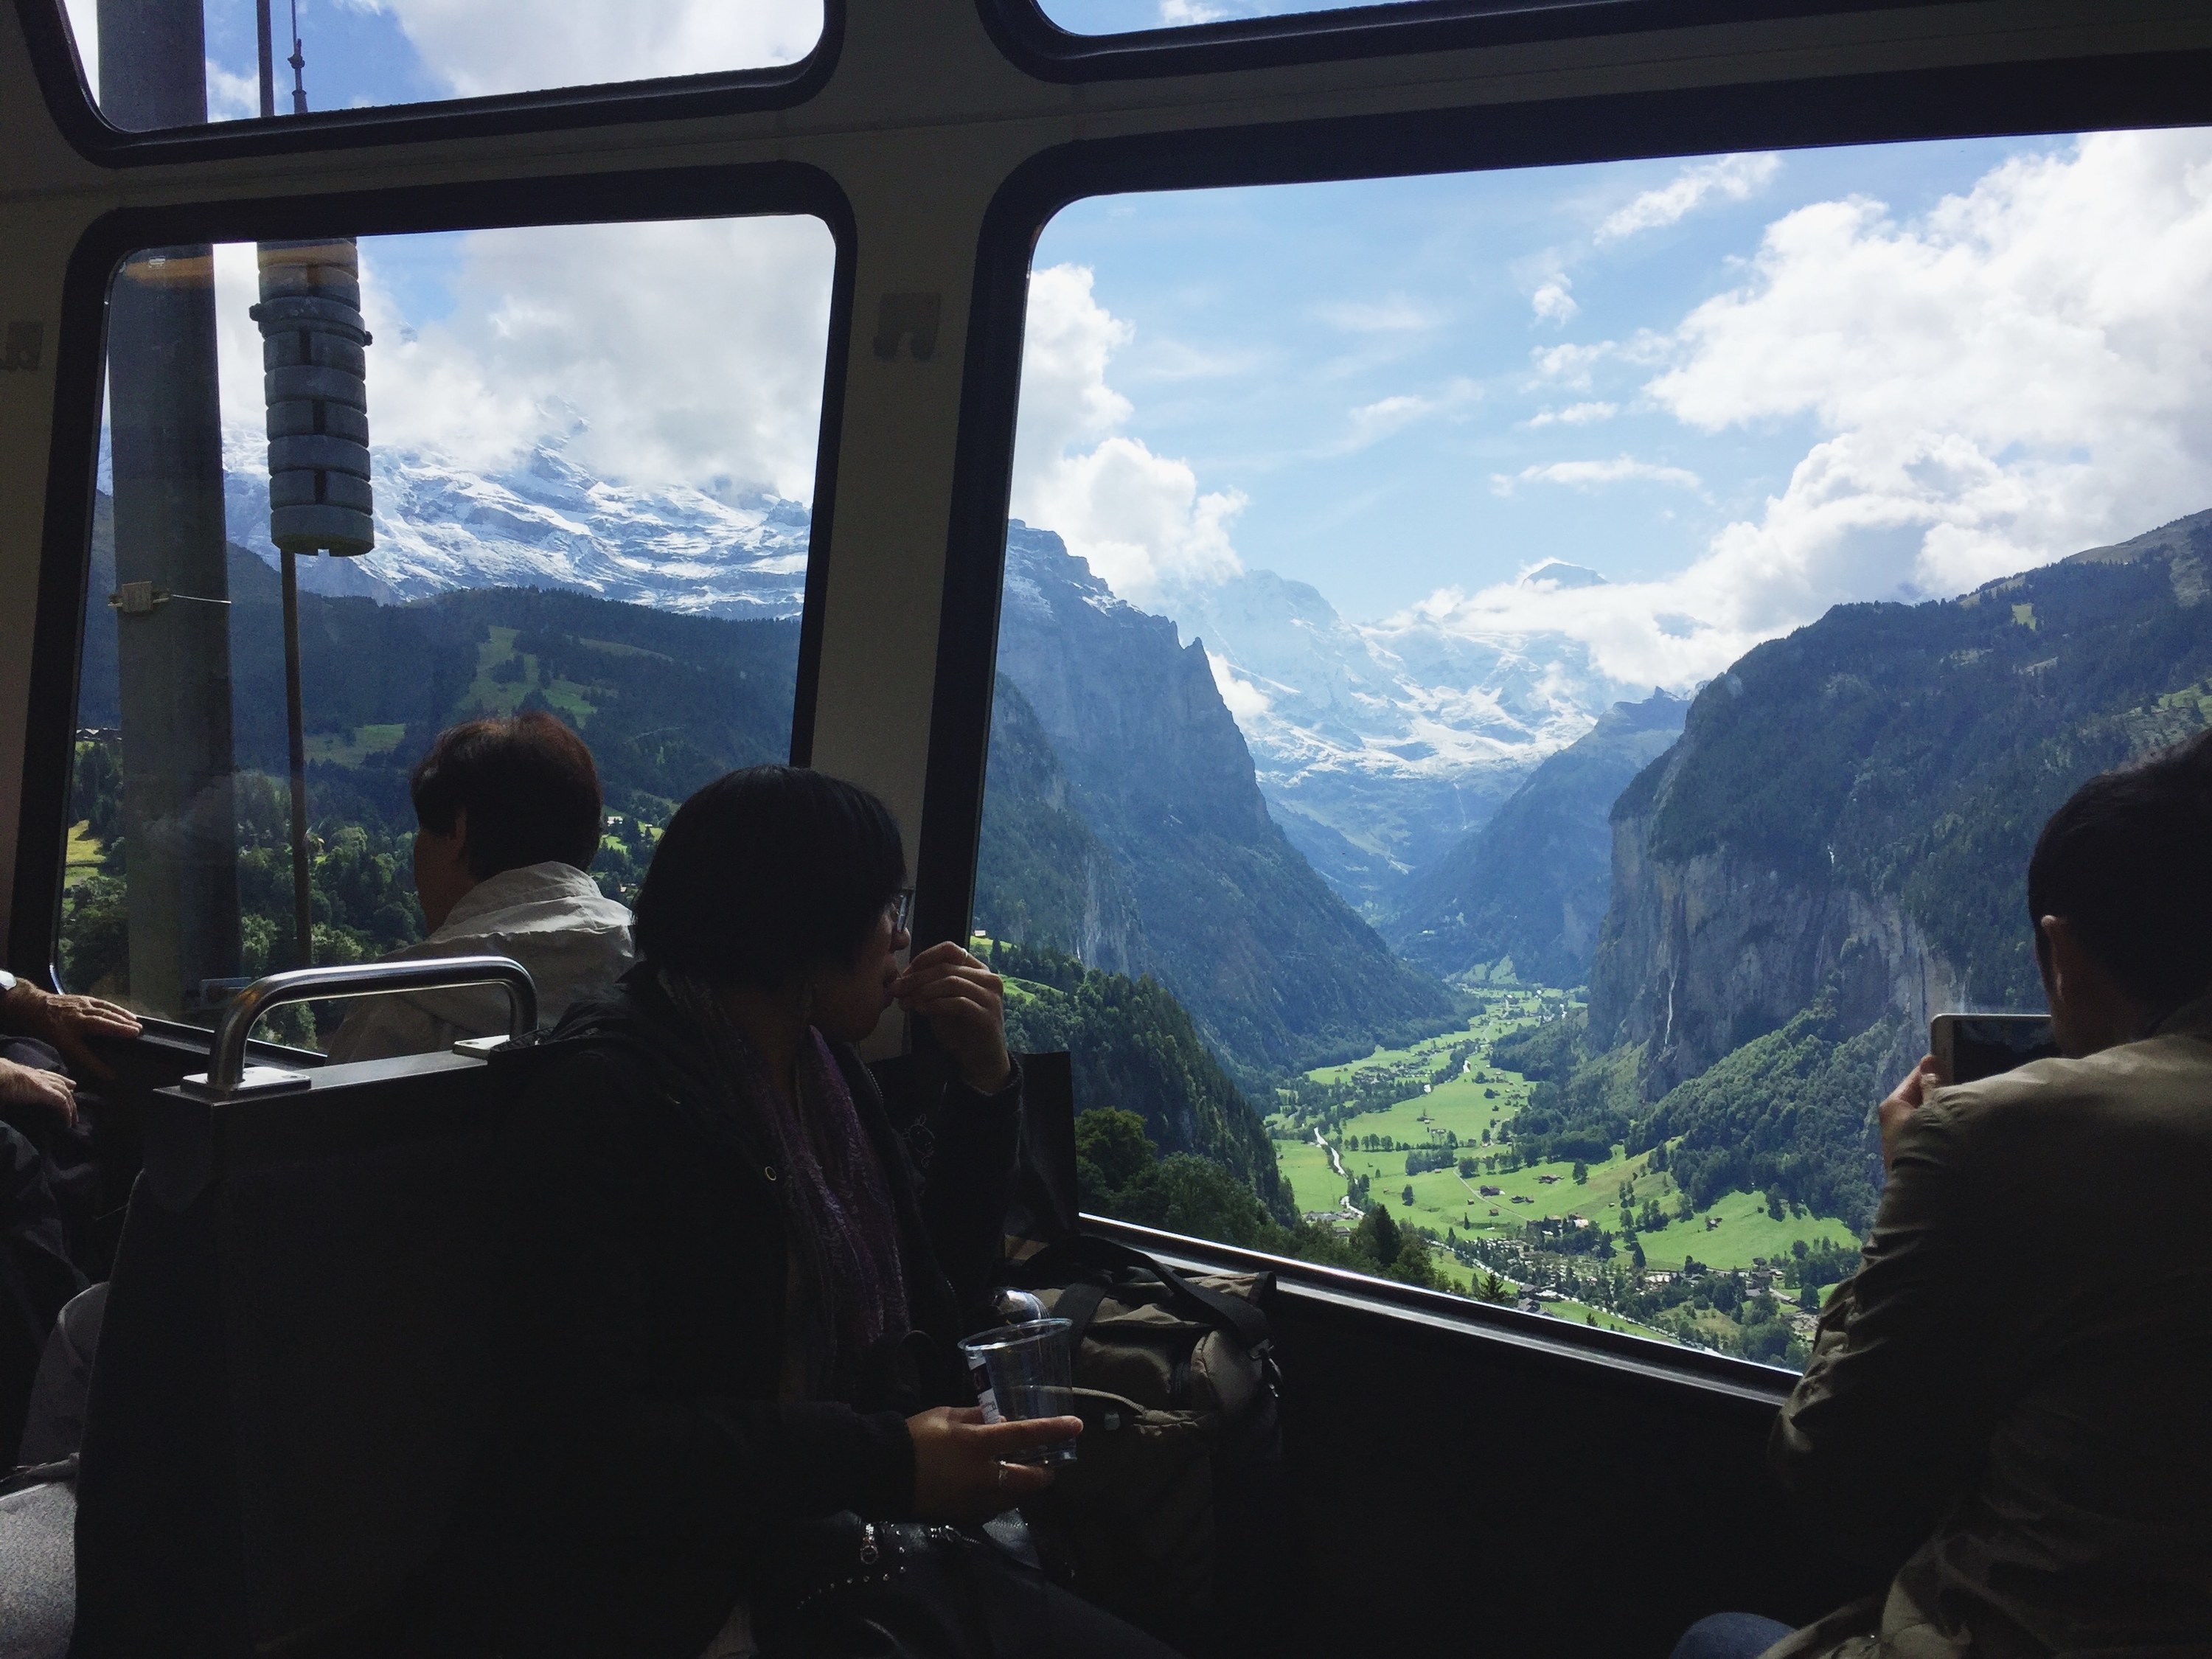 A view of the Lauterbrunnen Valley in Switzerland from a train window